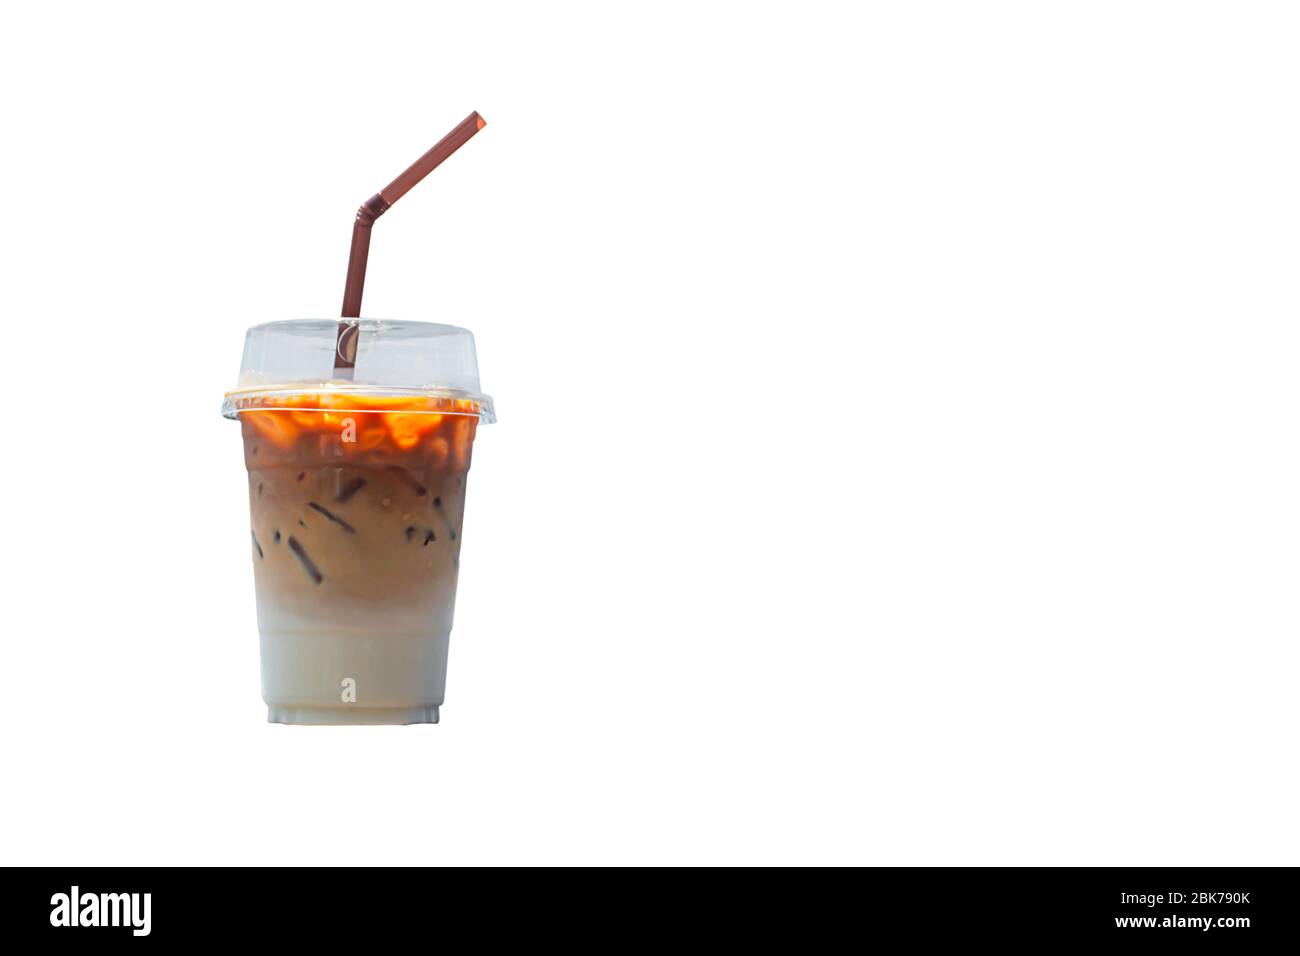 https://c8.alamy.com/comp/2BK790K/isolated-iced-coffee-in-a-plastic-glass-on-a-white-background-with-clipping-path-2BK790K.jpg